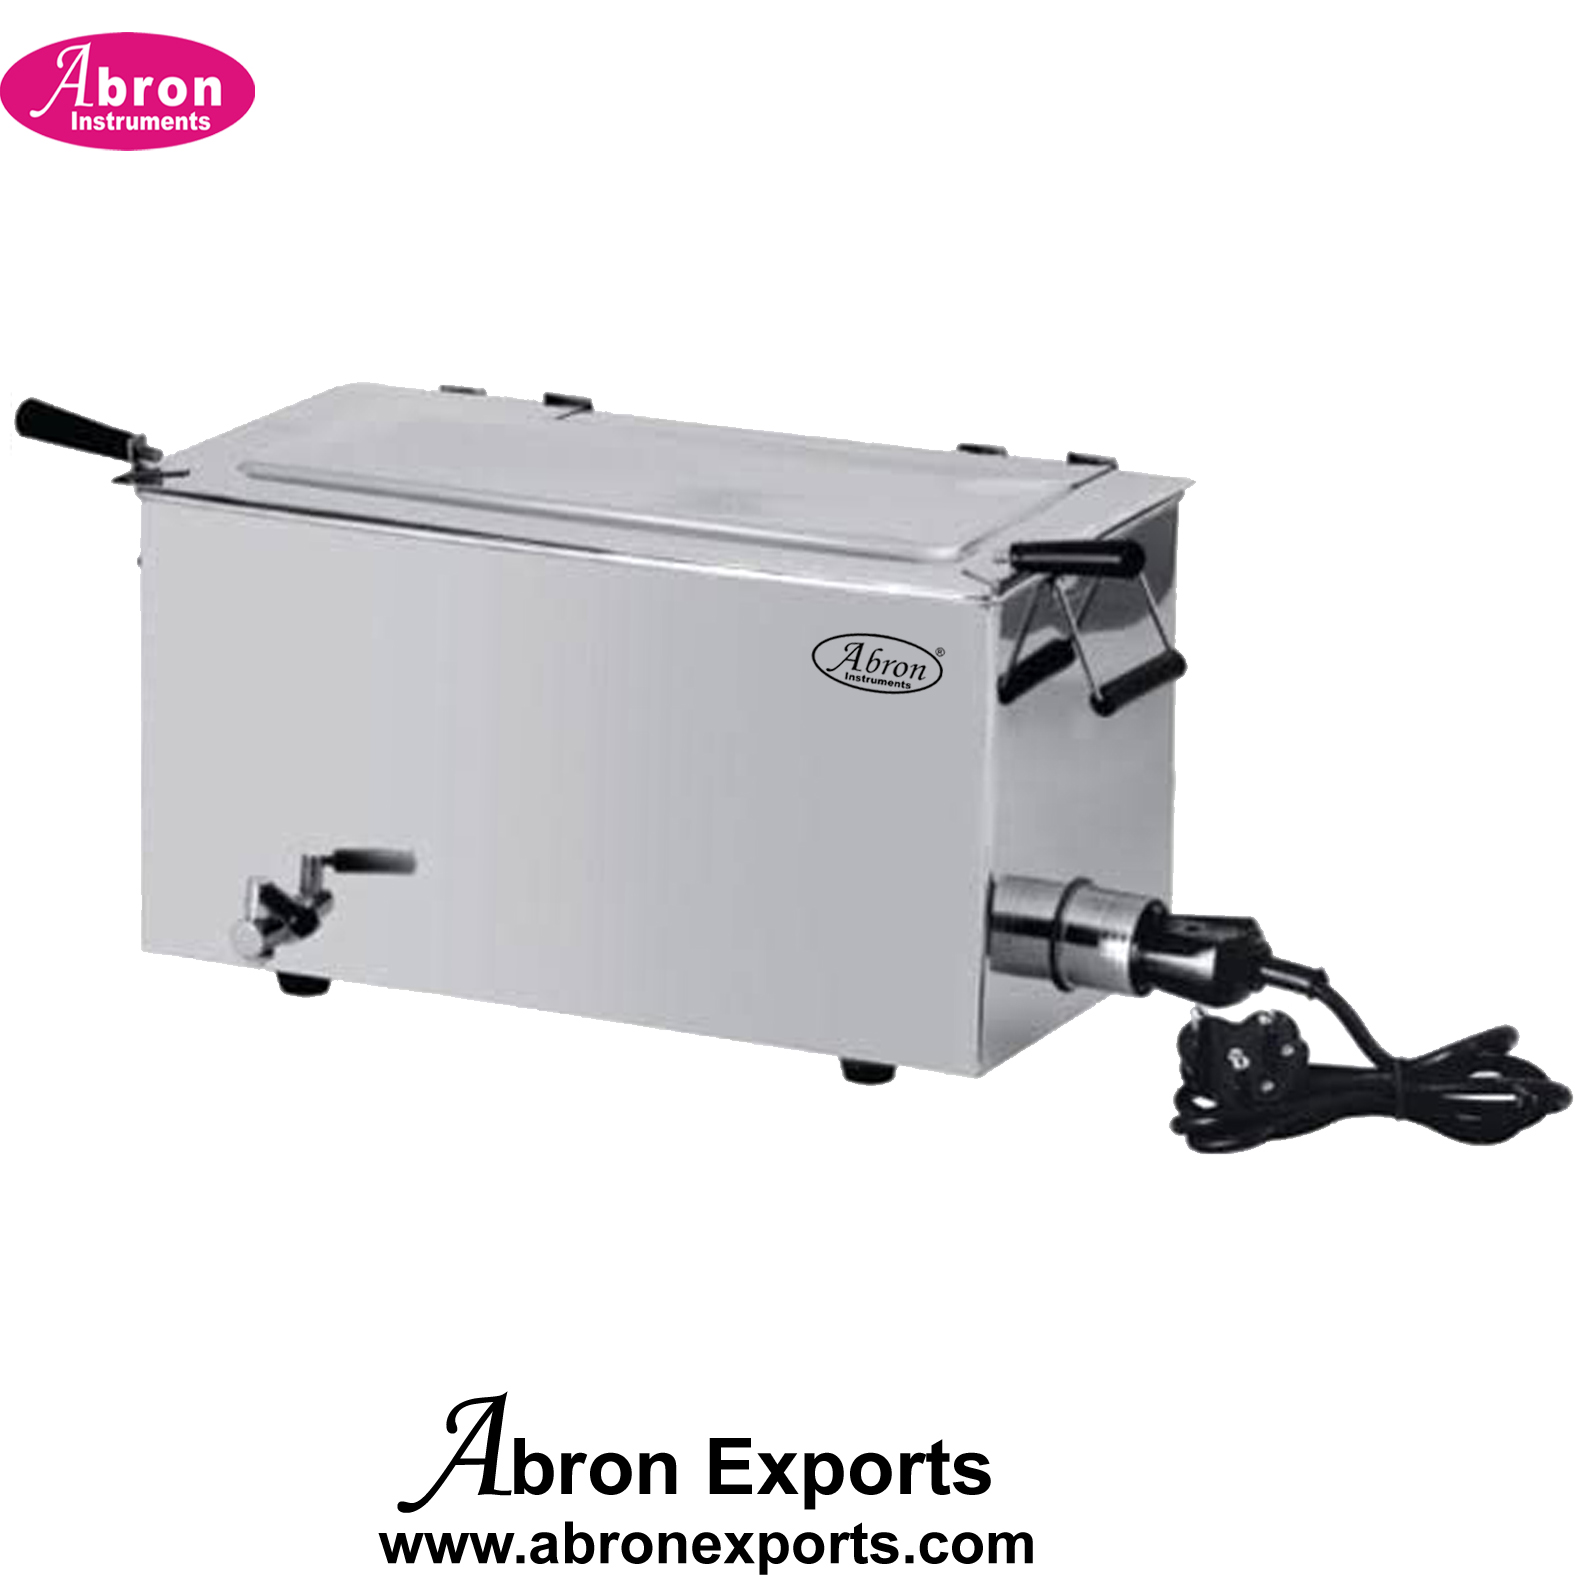 Surgical instruments sterilizer simple 16x8x6 inch with tray electric 220v heater wire Abron ABM-2325-ST16S